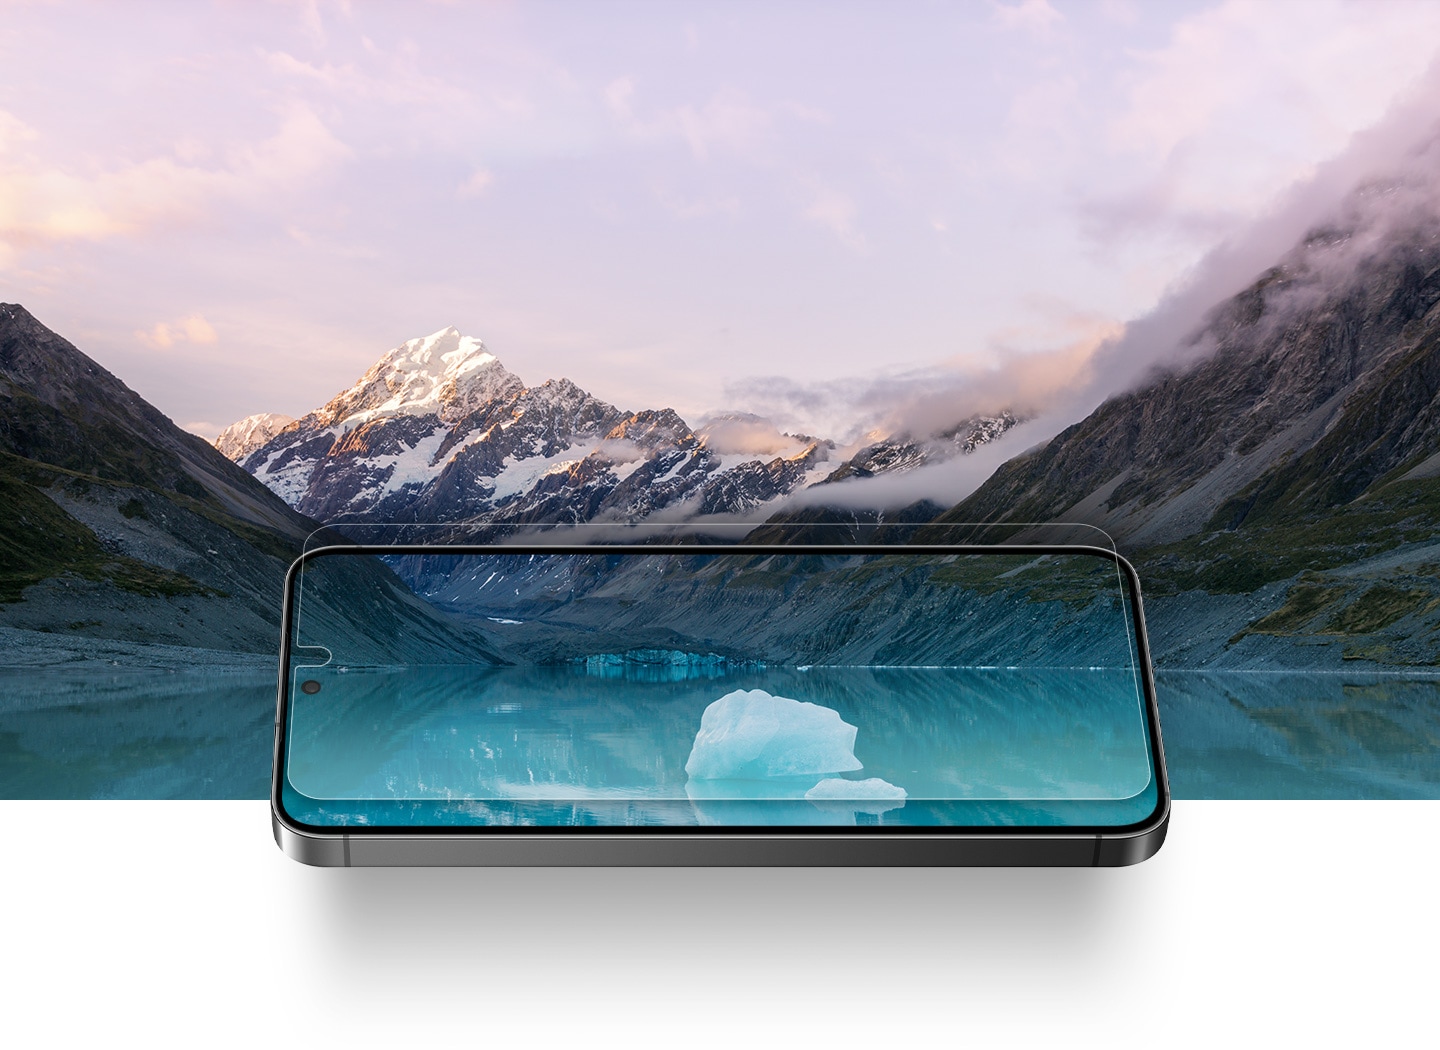 The Galaxy S24 with the Anti-Reflecting Screen Protector is overlaid on a snowy landscape of mountains and a lake. The clarity of the landscape can be seen through the lenses-like transparency of the screen protector.